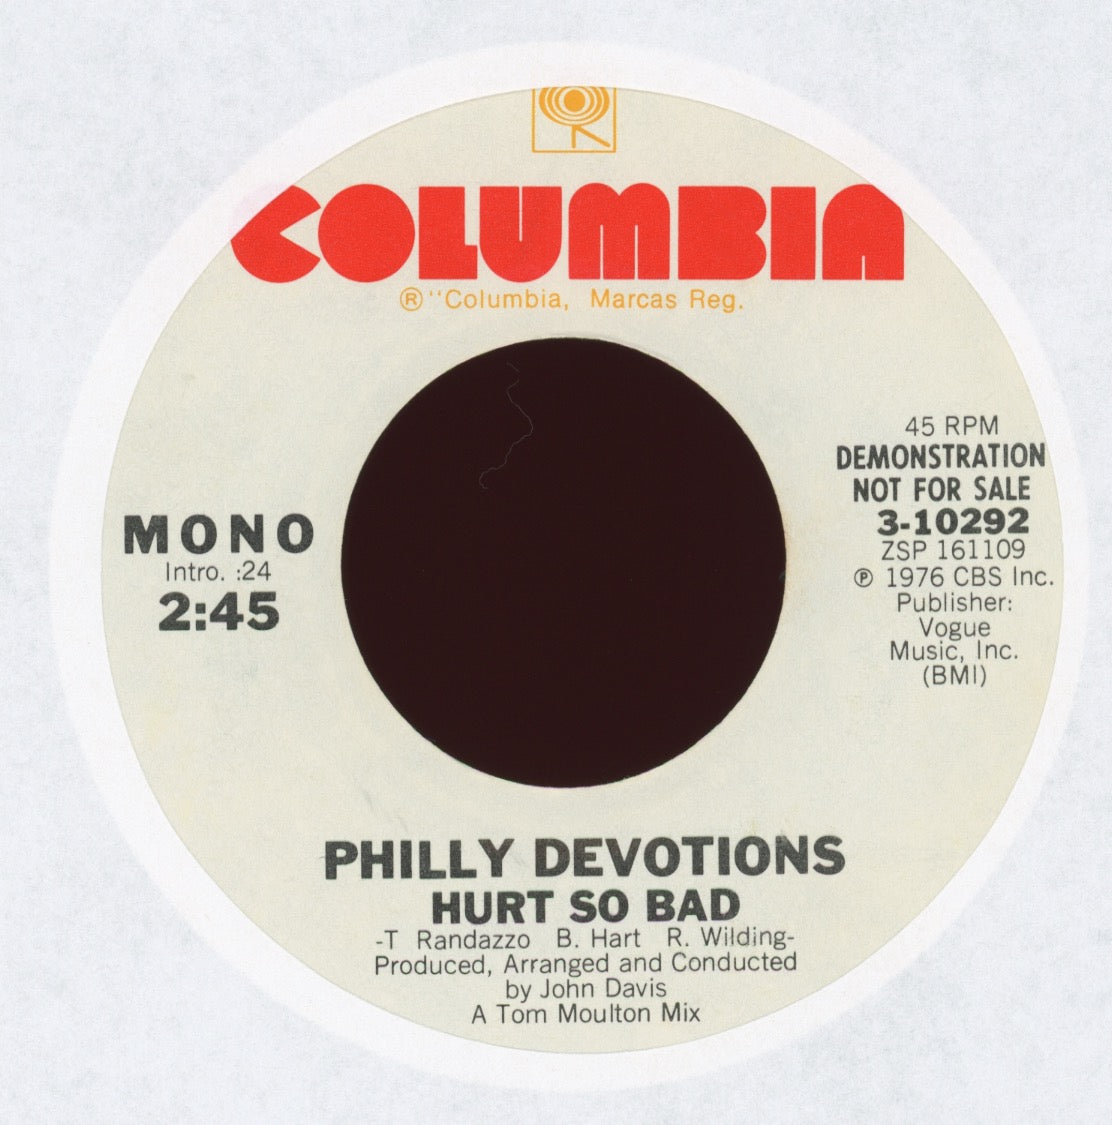 Philly Devotions - Hurt So Bad on Columbia Promo